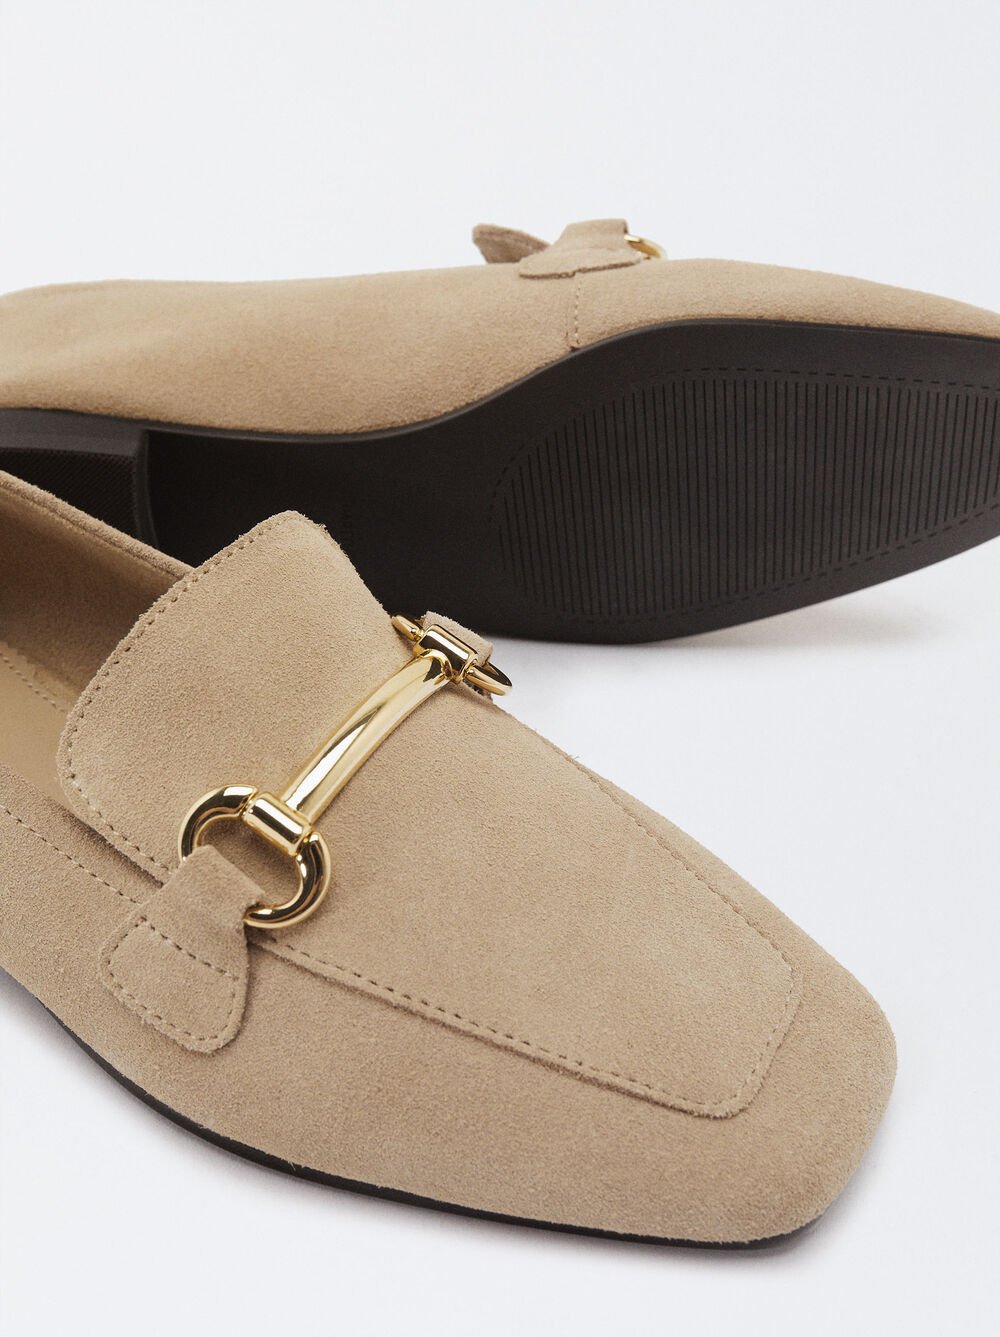 Online Exclusive - Suede Leather Loafers Buckle